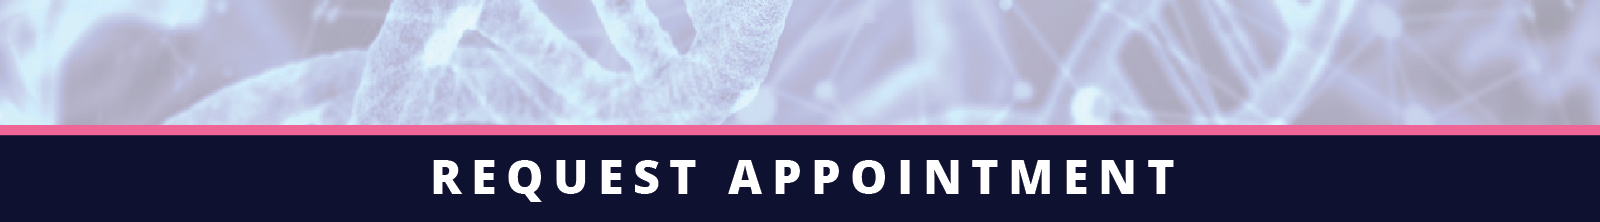 Request appointment banner